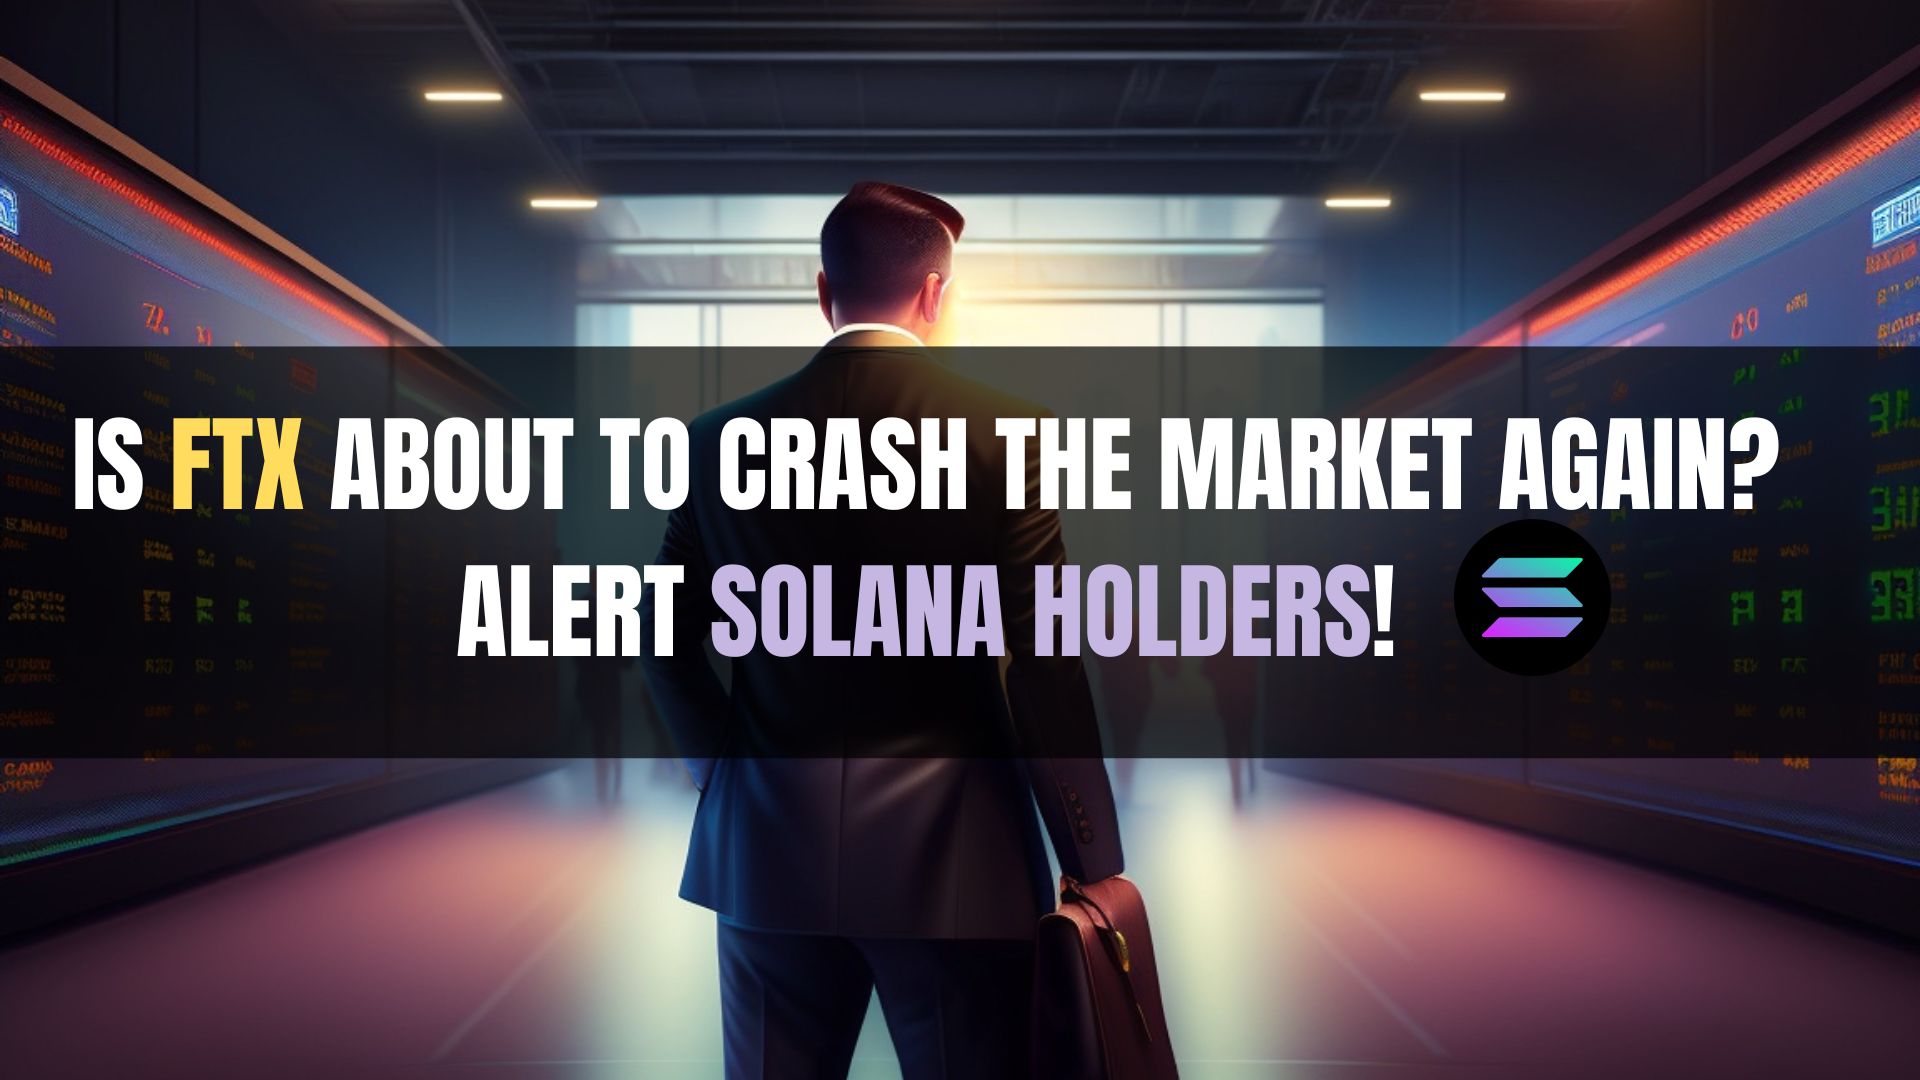 Is FTX about to CRASH the market again? Alert SOLANA holders!